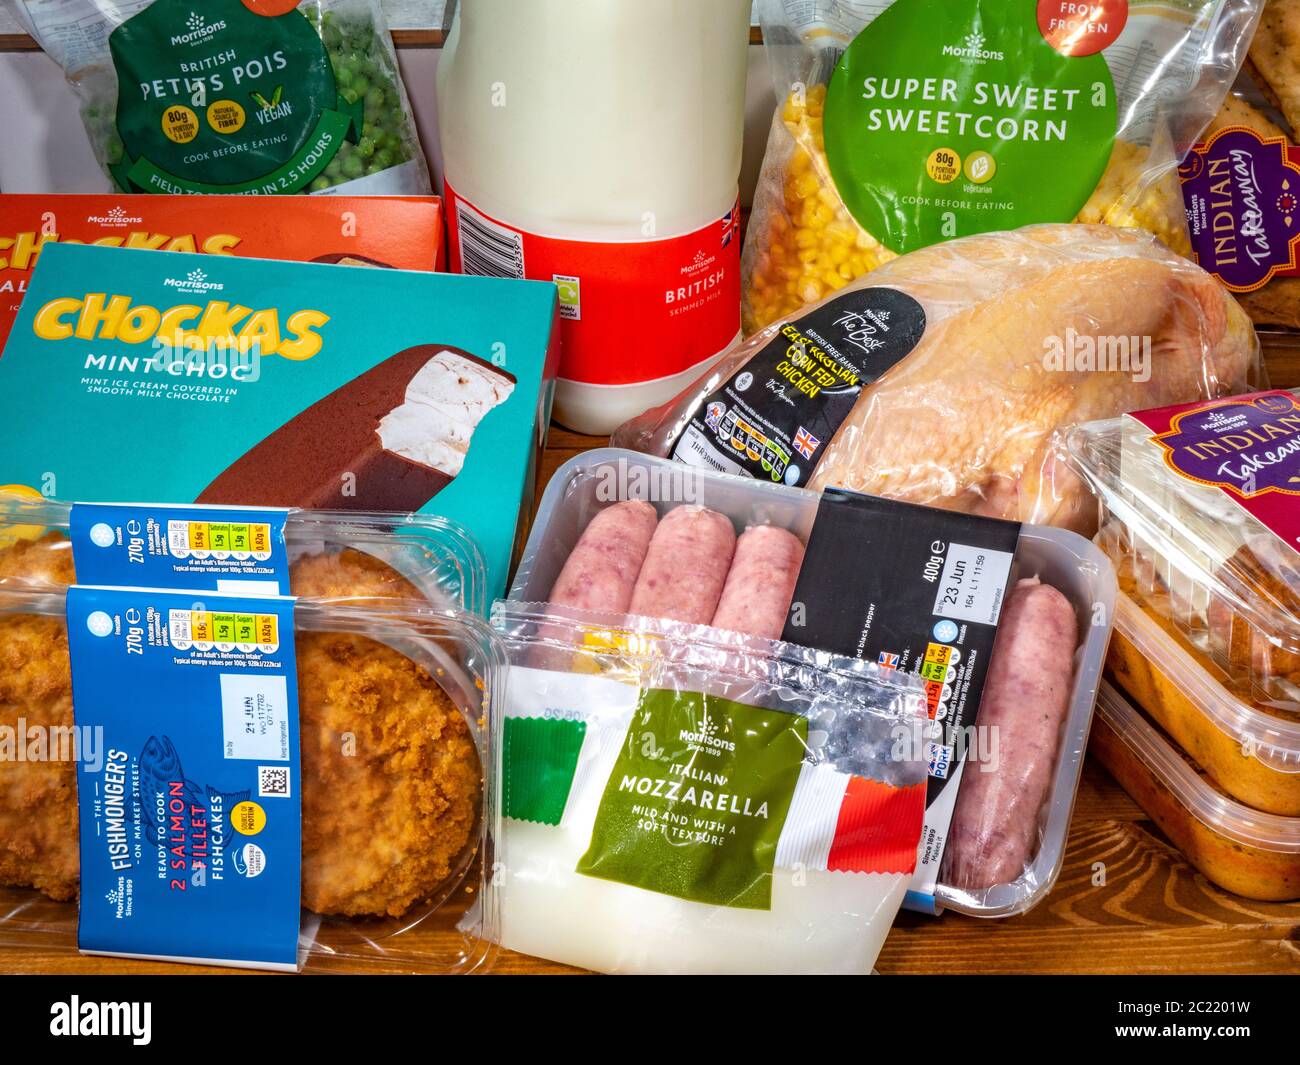 https://c8.alamy.com/comp/2C2201W/closeup-of-morrisons-supermarket-cold-and-frozen-food-shopping-items-unpacked-by-a-shopper-at-home-and-ready-to-put-in-the-fridge-and-freezer-2C2201W.jpg